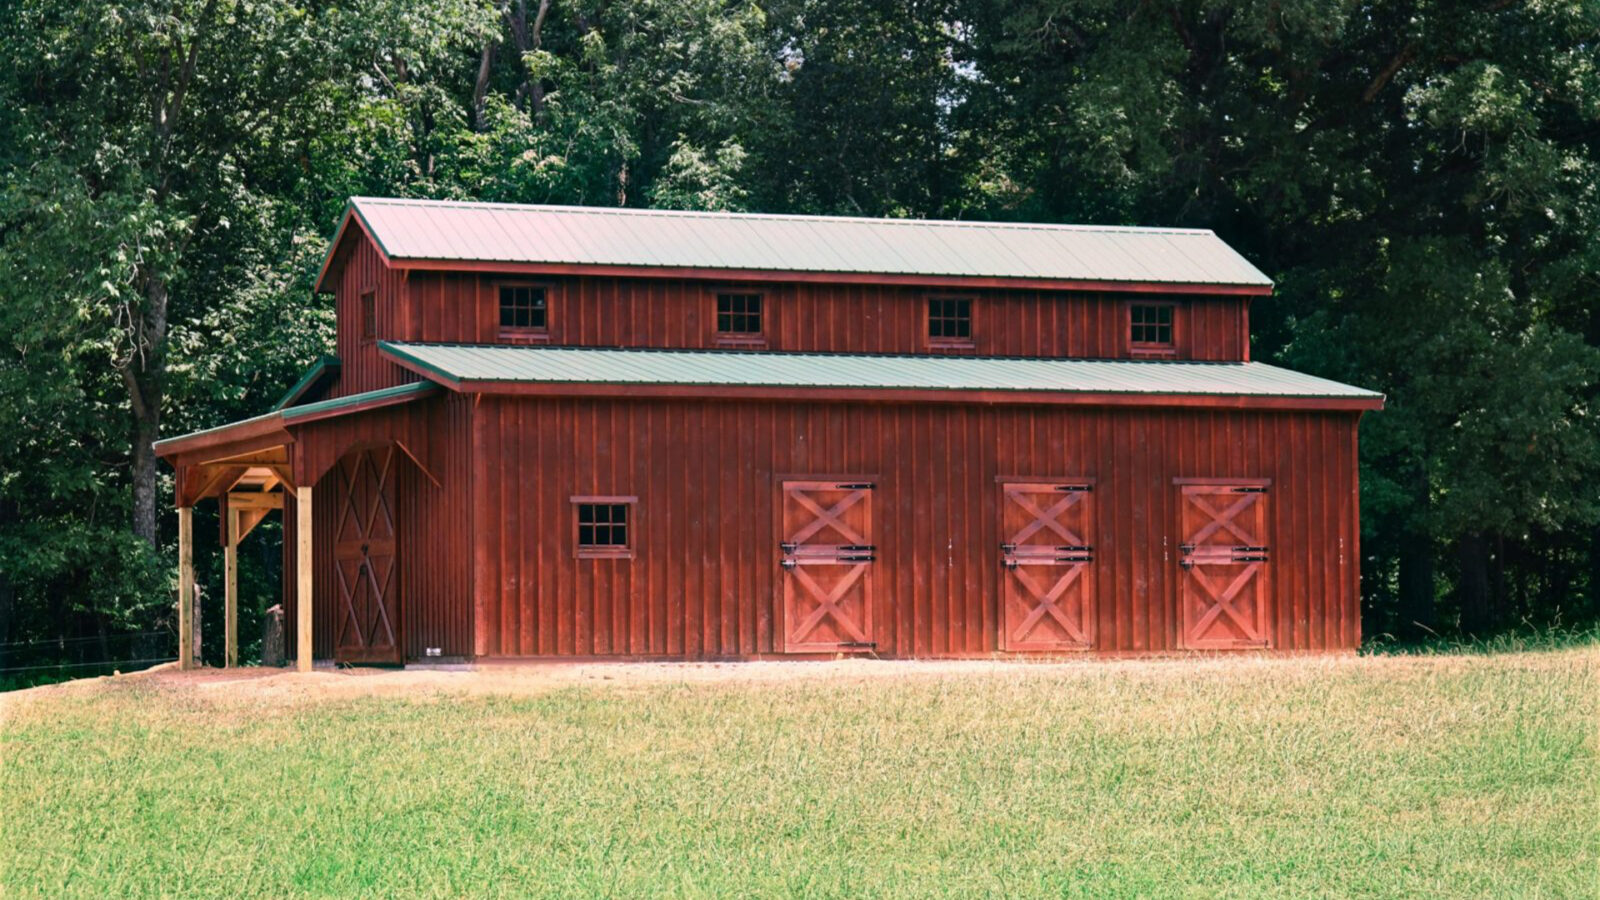 A Monitor Horse Barn which is one of the best types of horse barns.